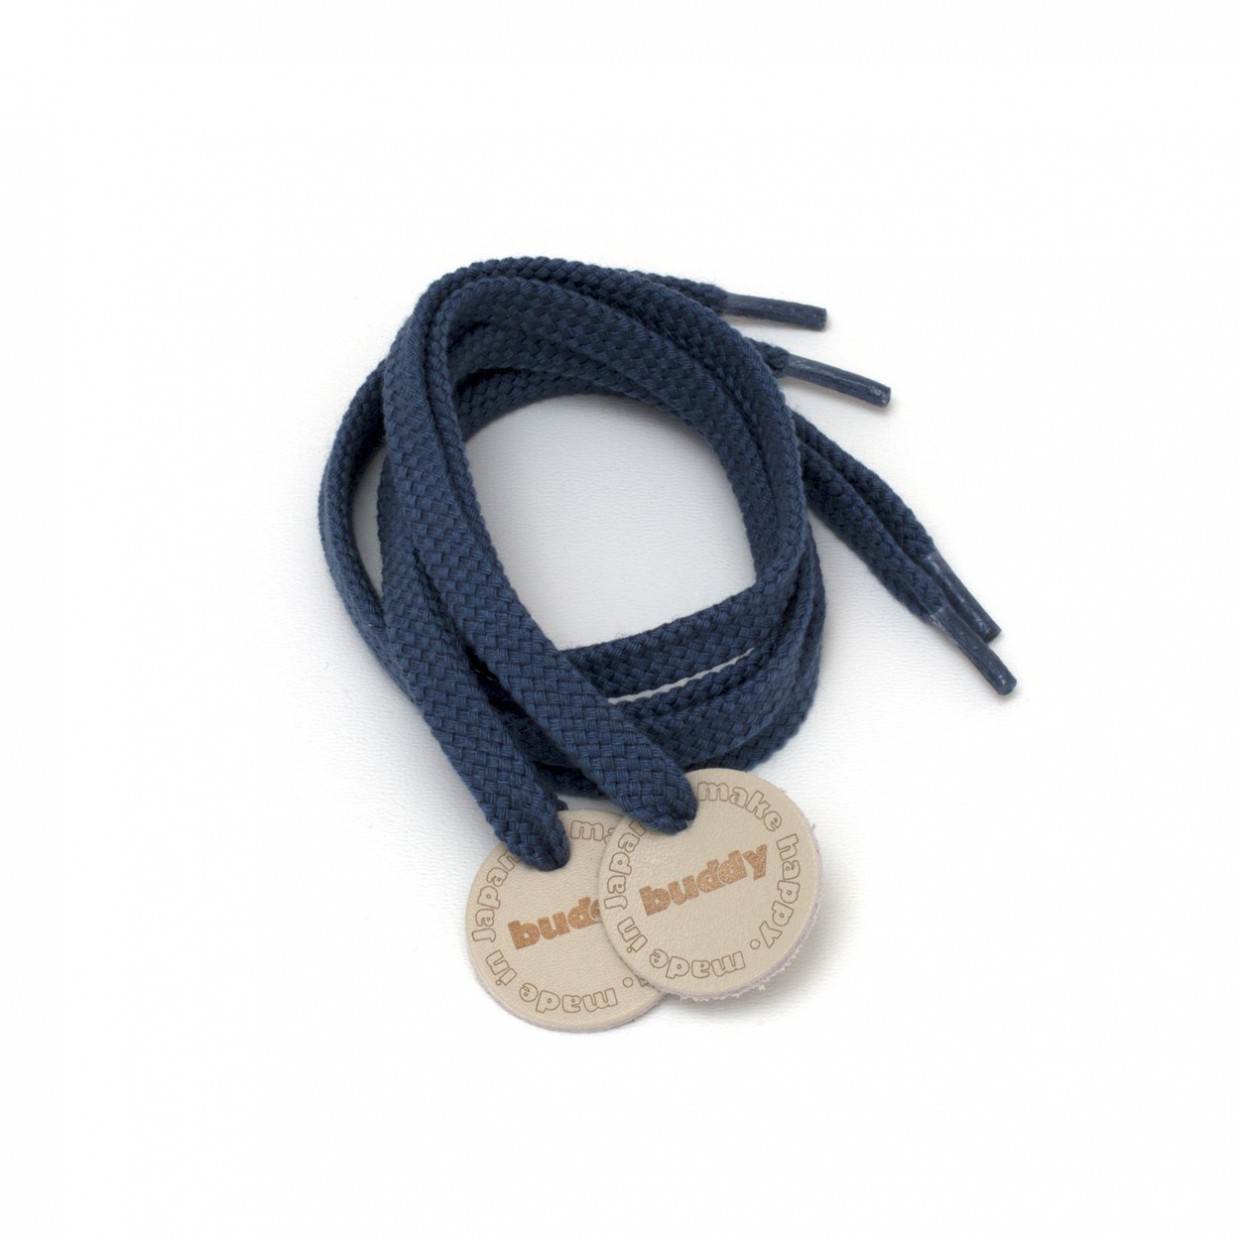 Shoelaces Navy with Leather patch 78 cm : 31 "